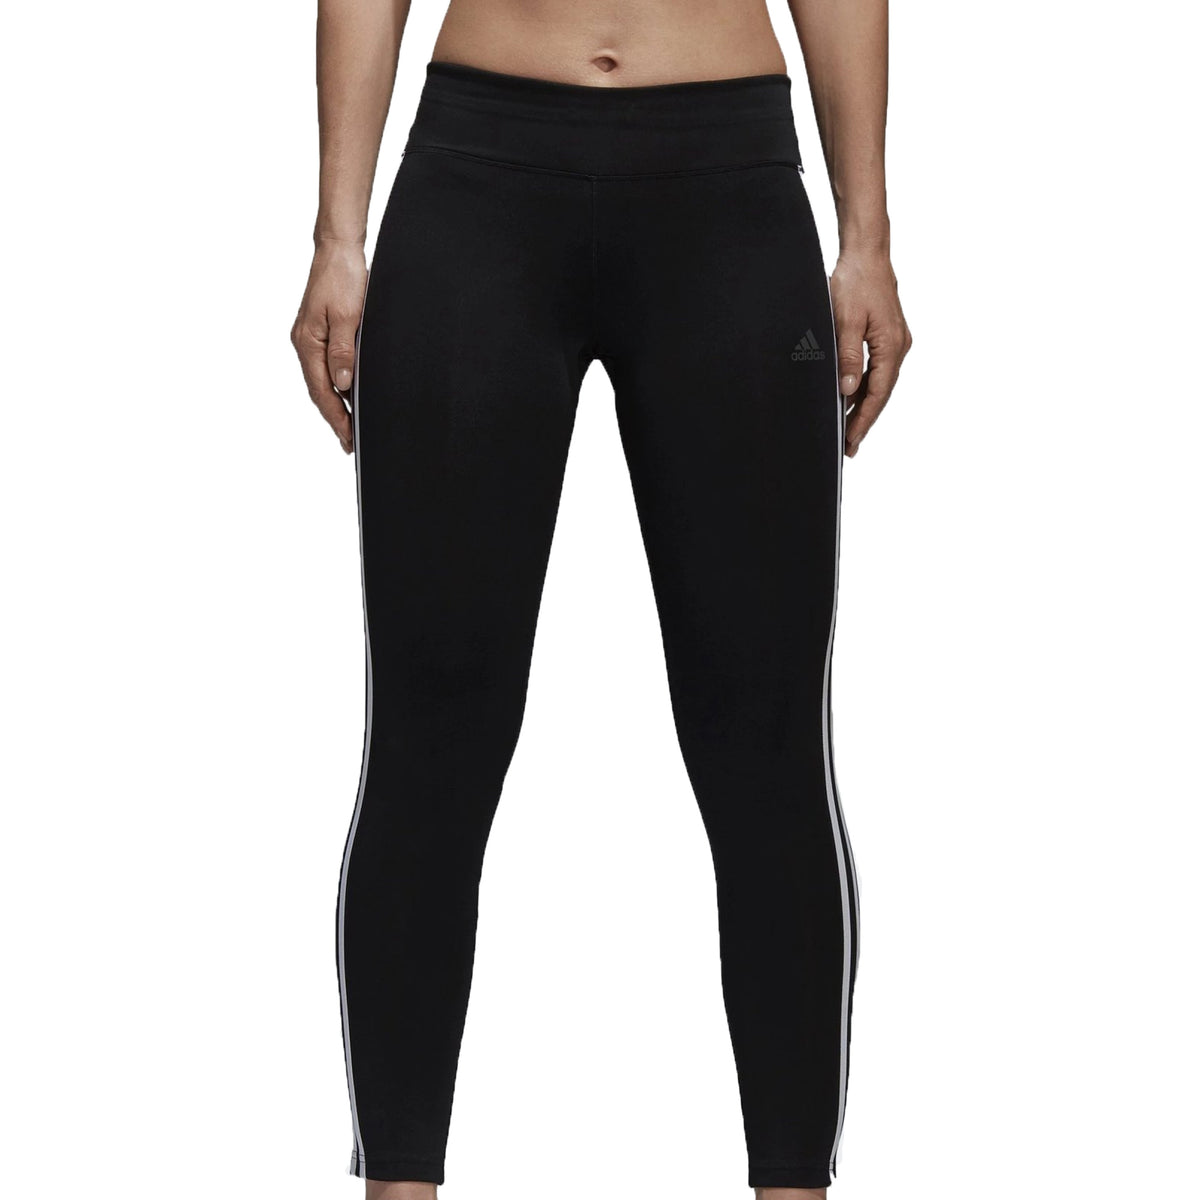 Sell Adidas Climalite Leggings With 3 Stripes - Black